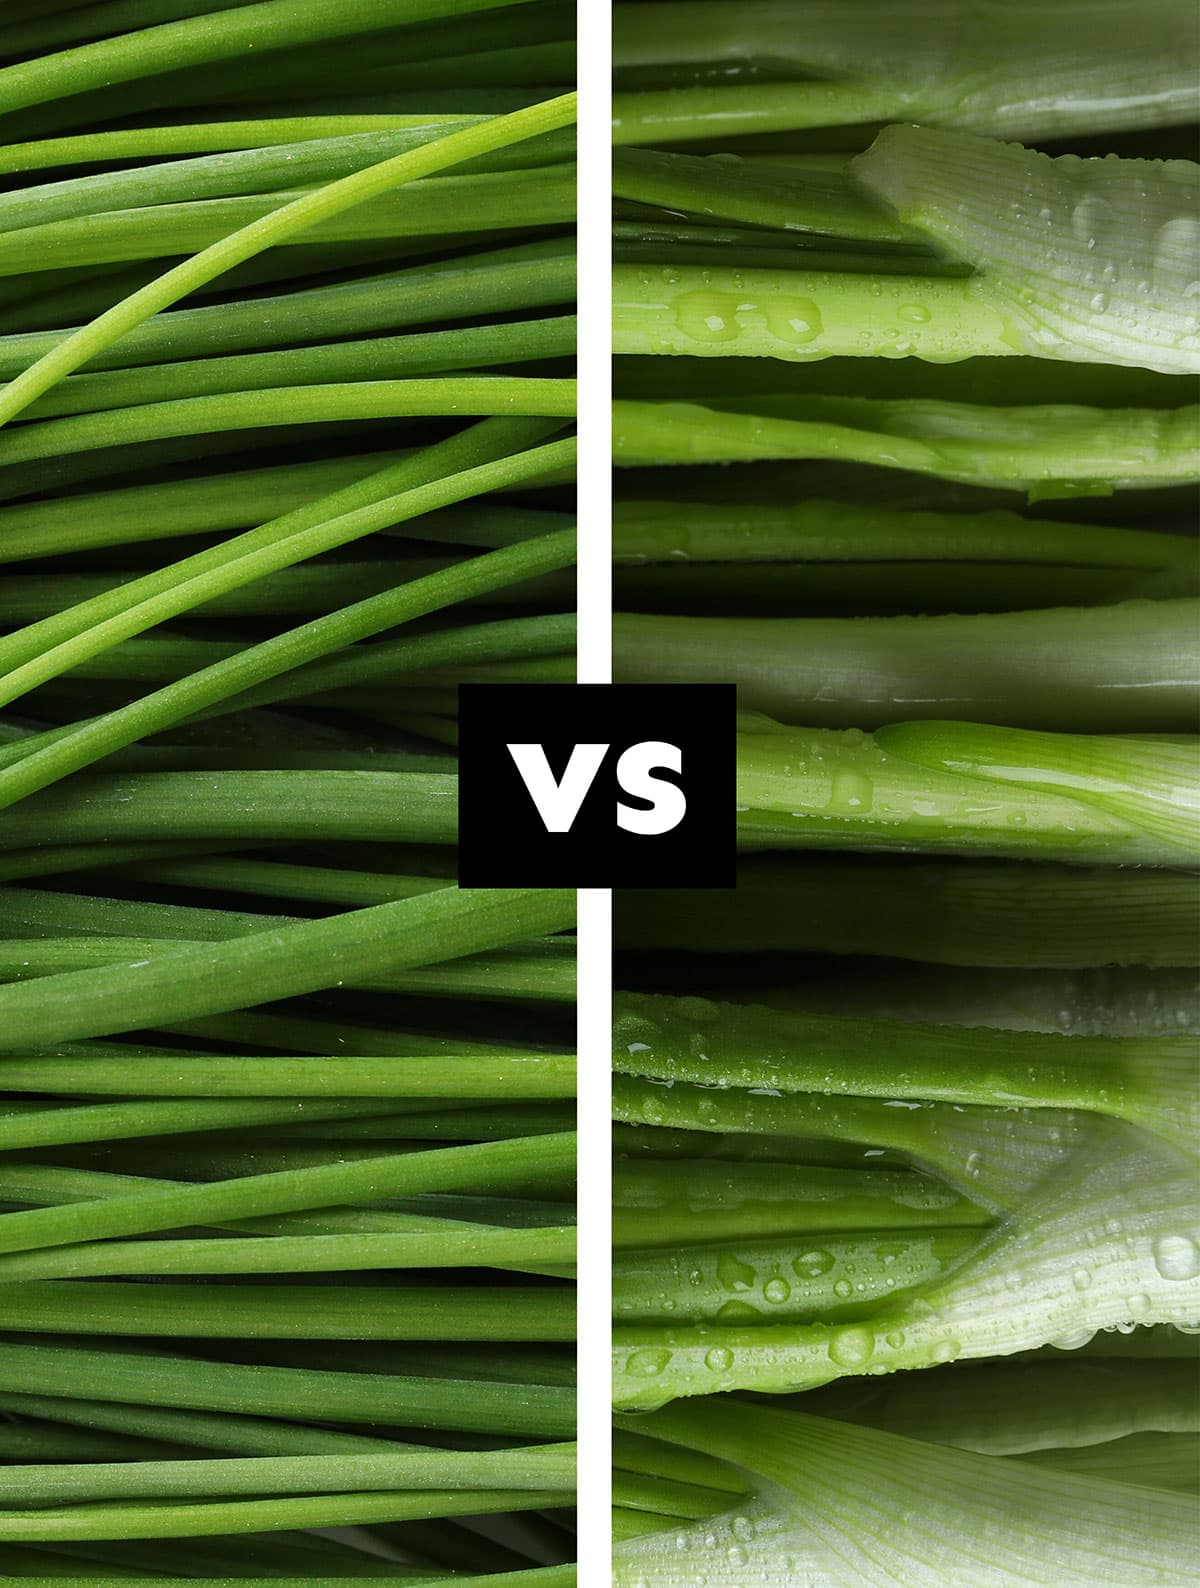 Chives vs green onions.